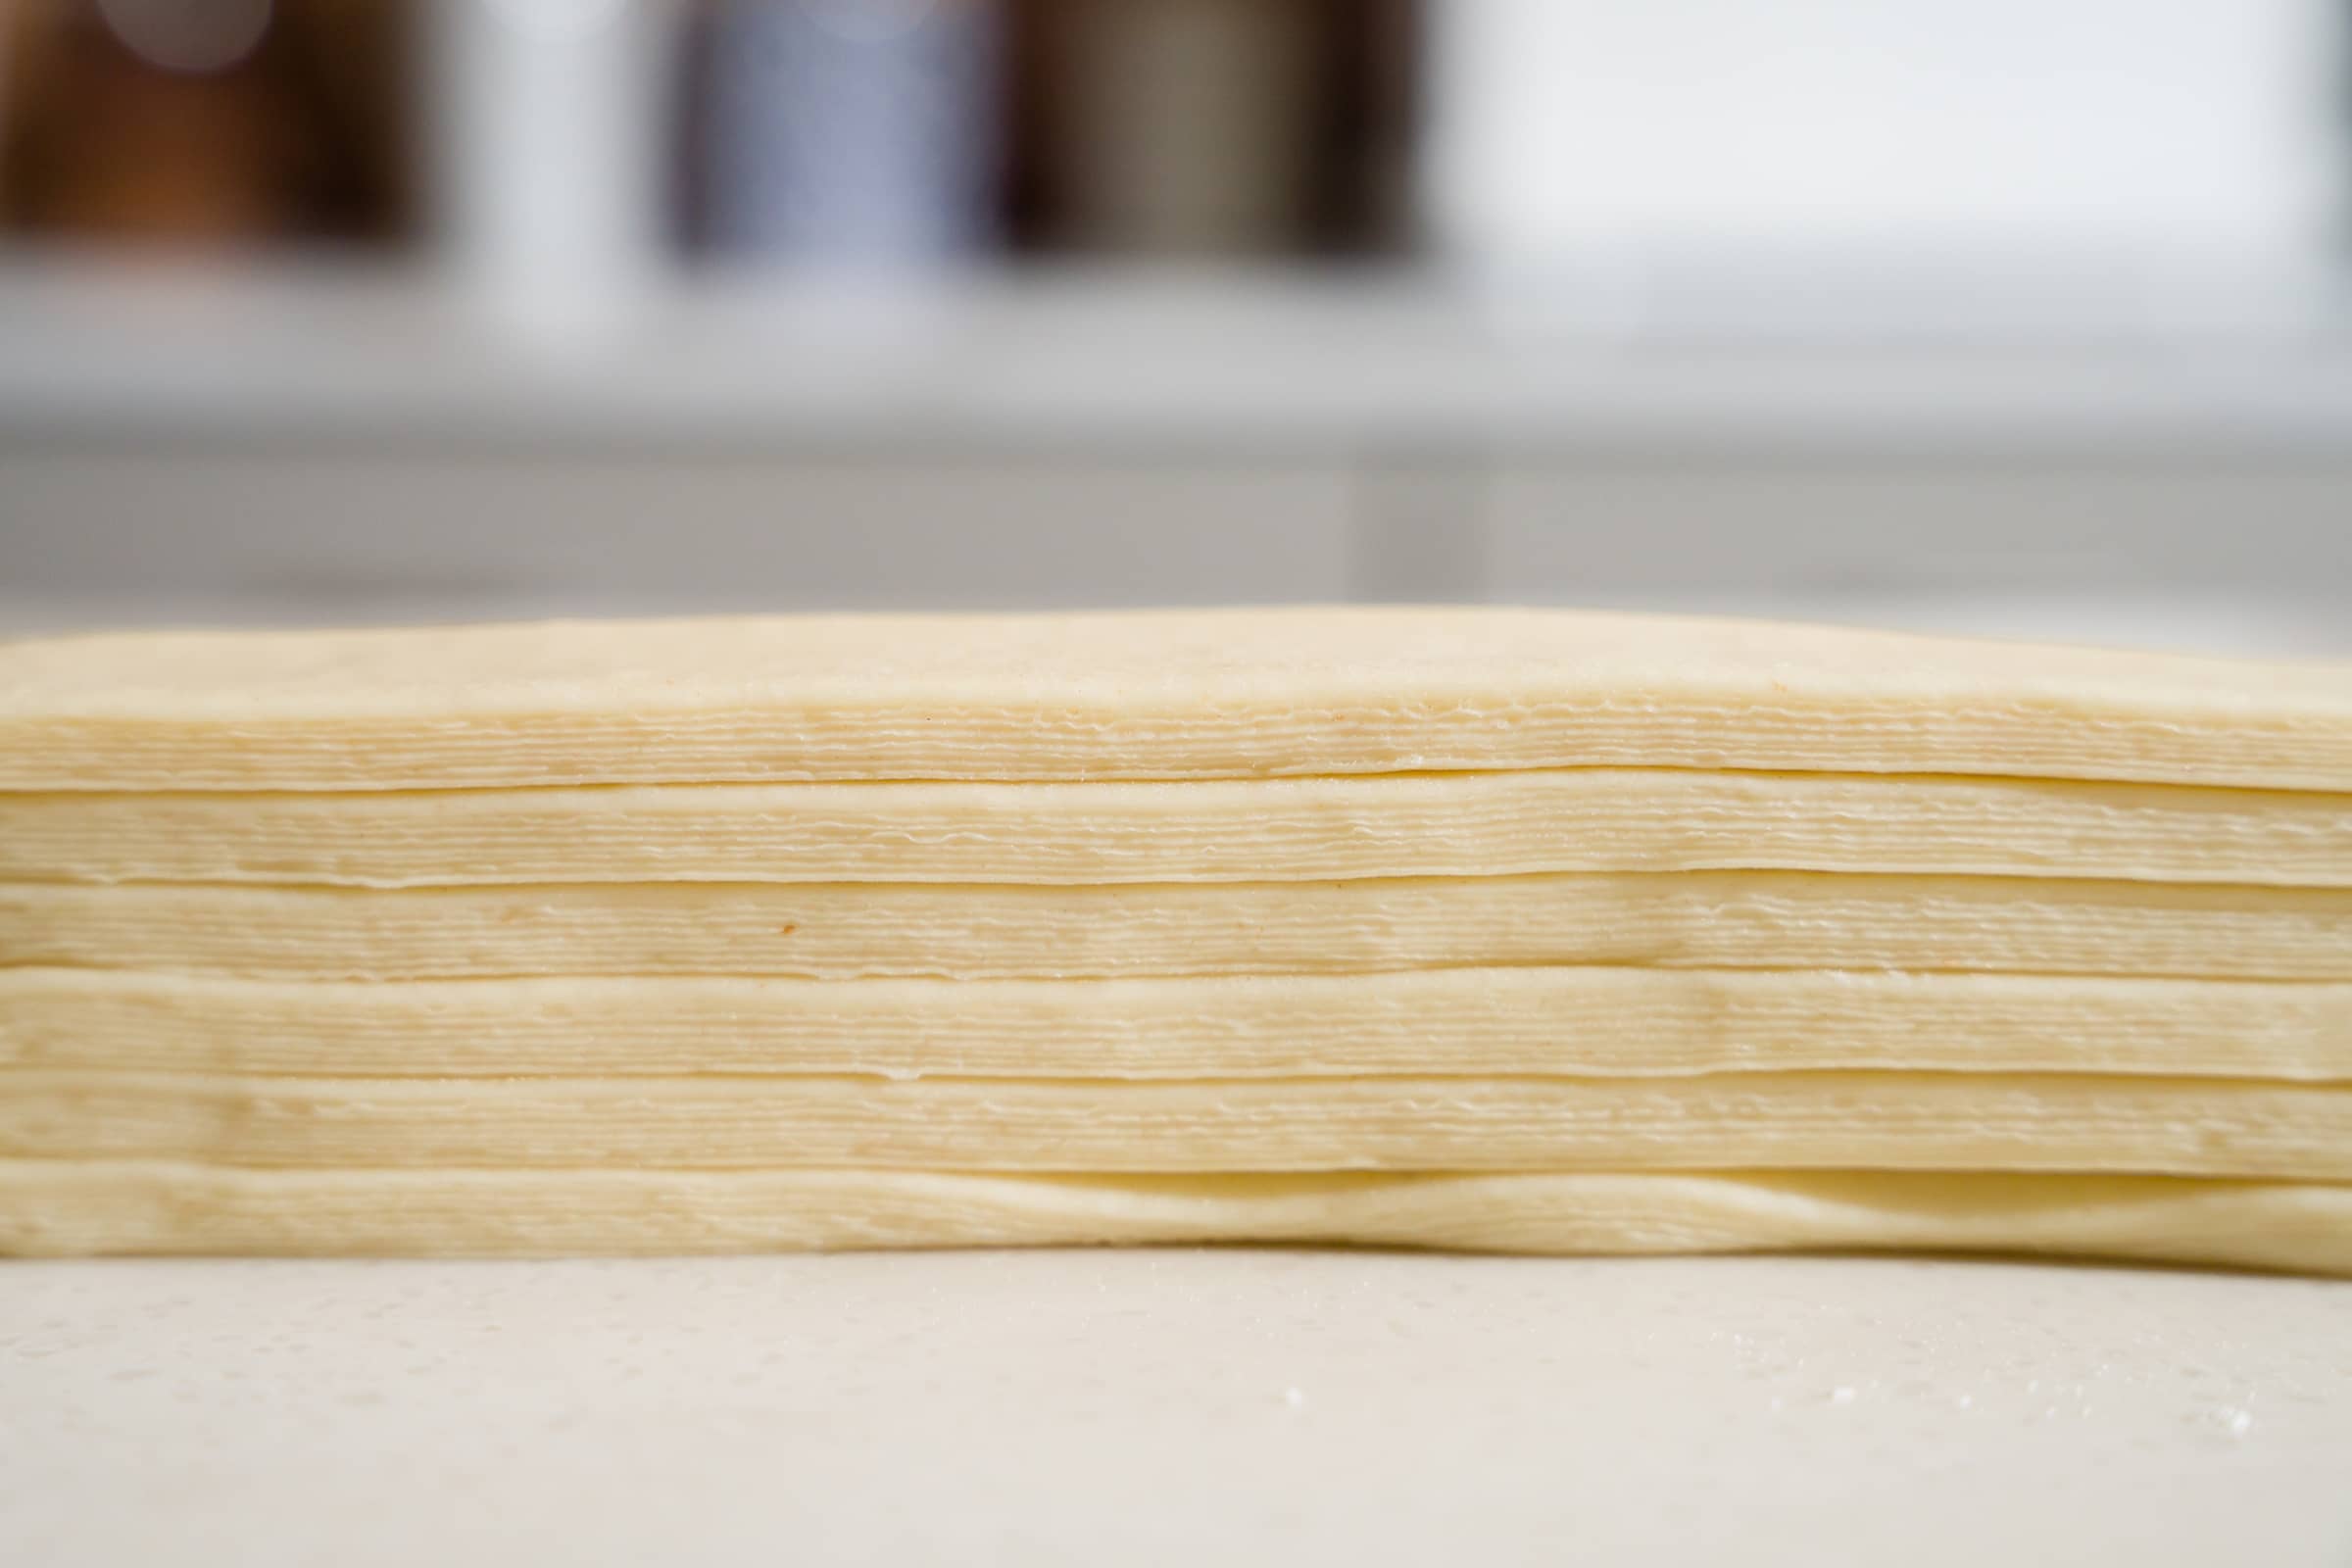 Dough strips shown their thickness